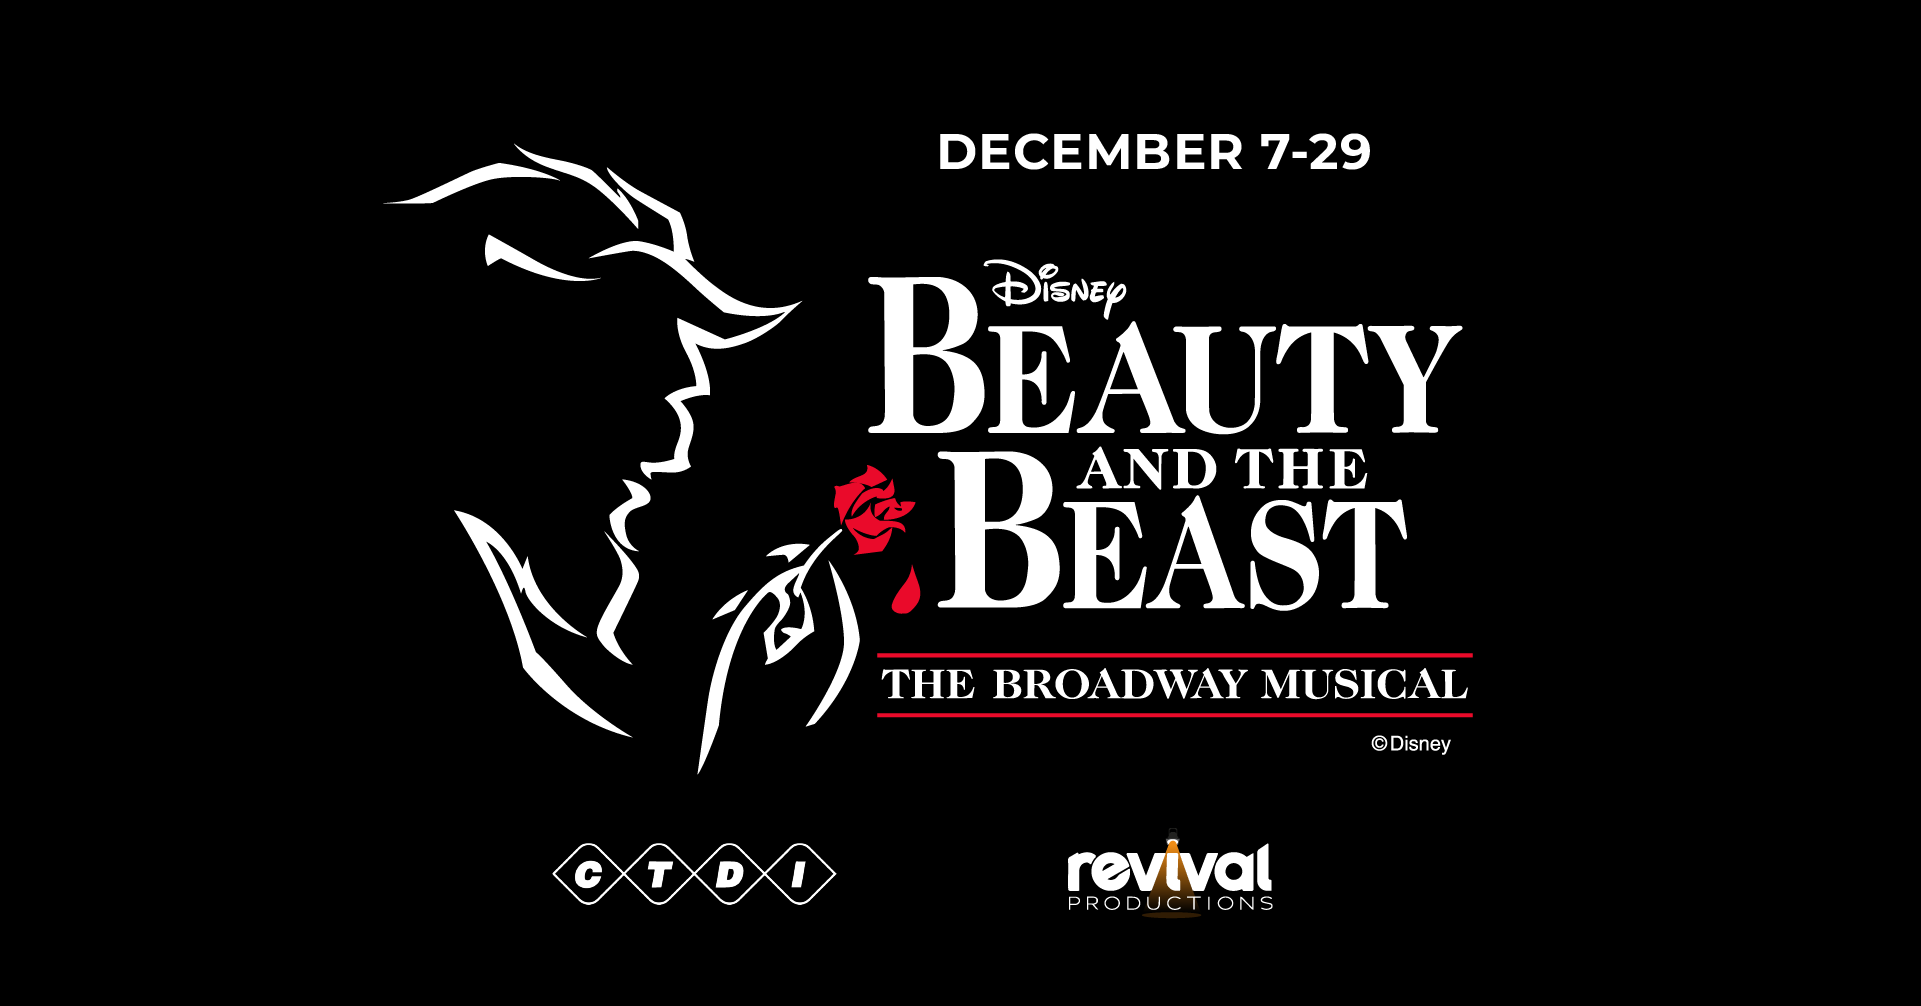 Beauty and the Beast logo text in white with a white outlined silhouette of the Beast holding a red rose.